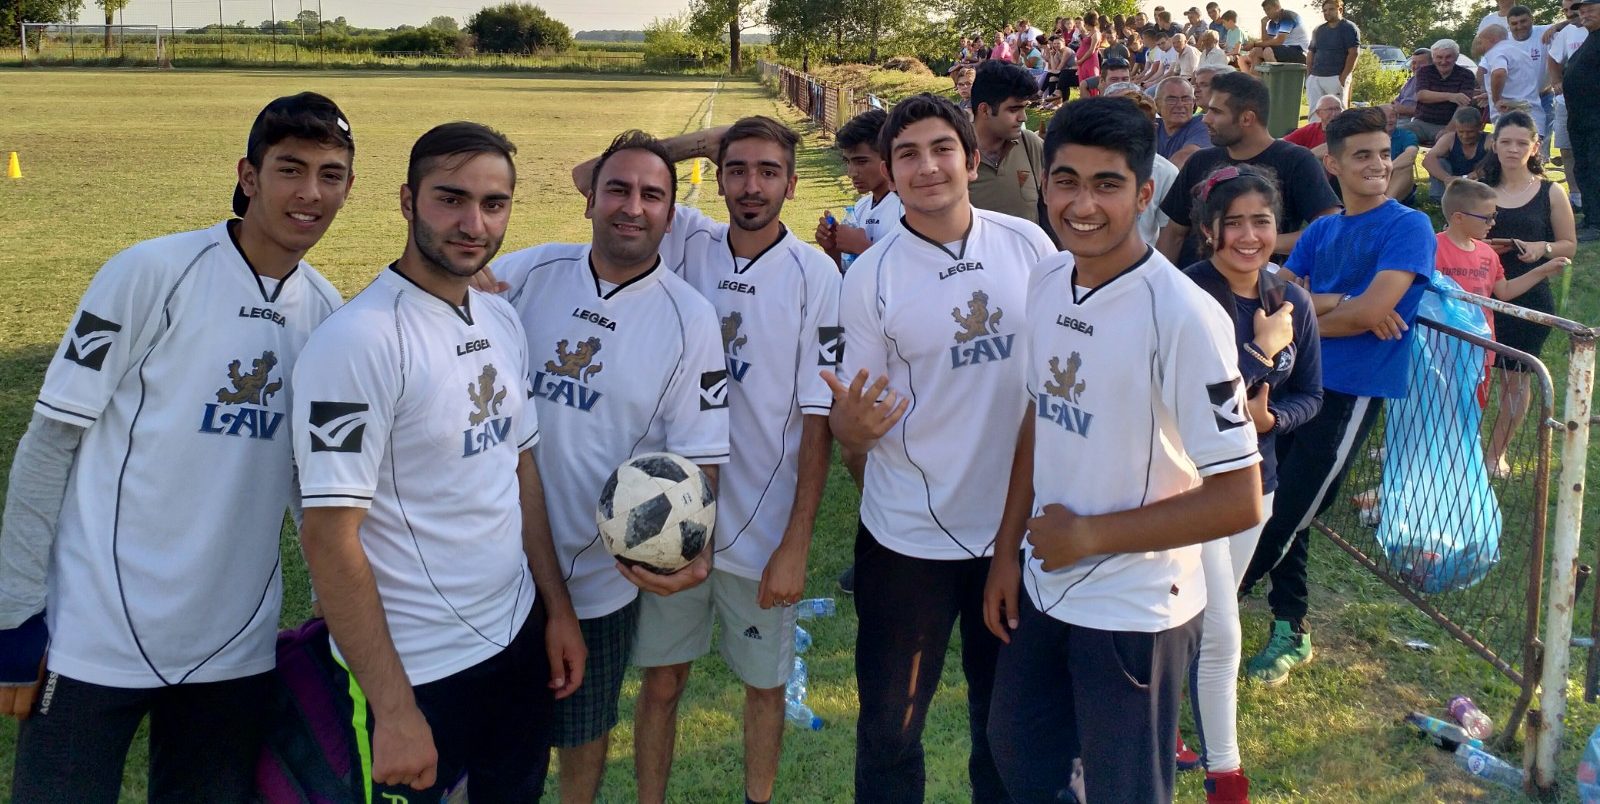 Football matches for socializing without borders